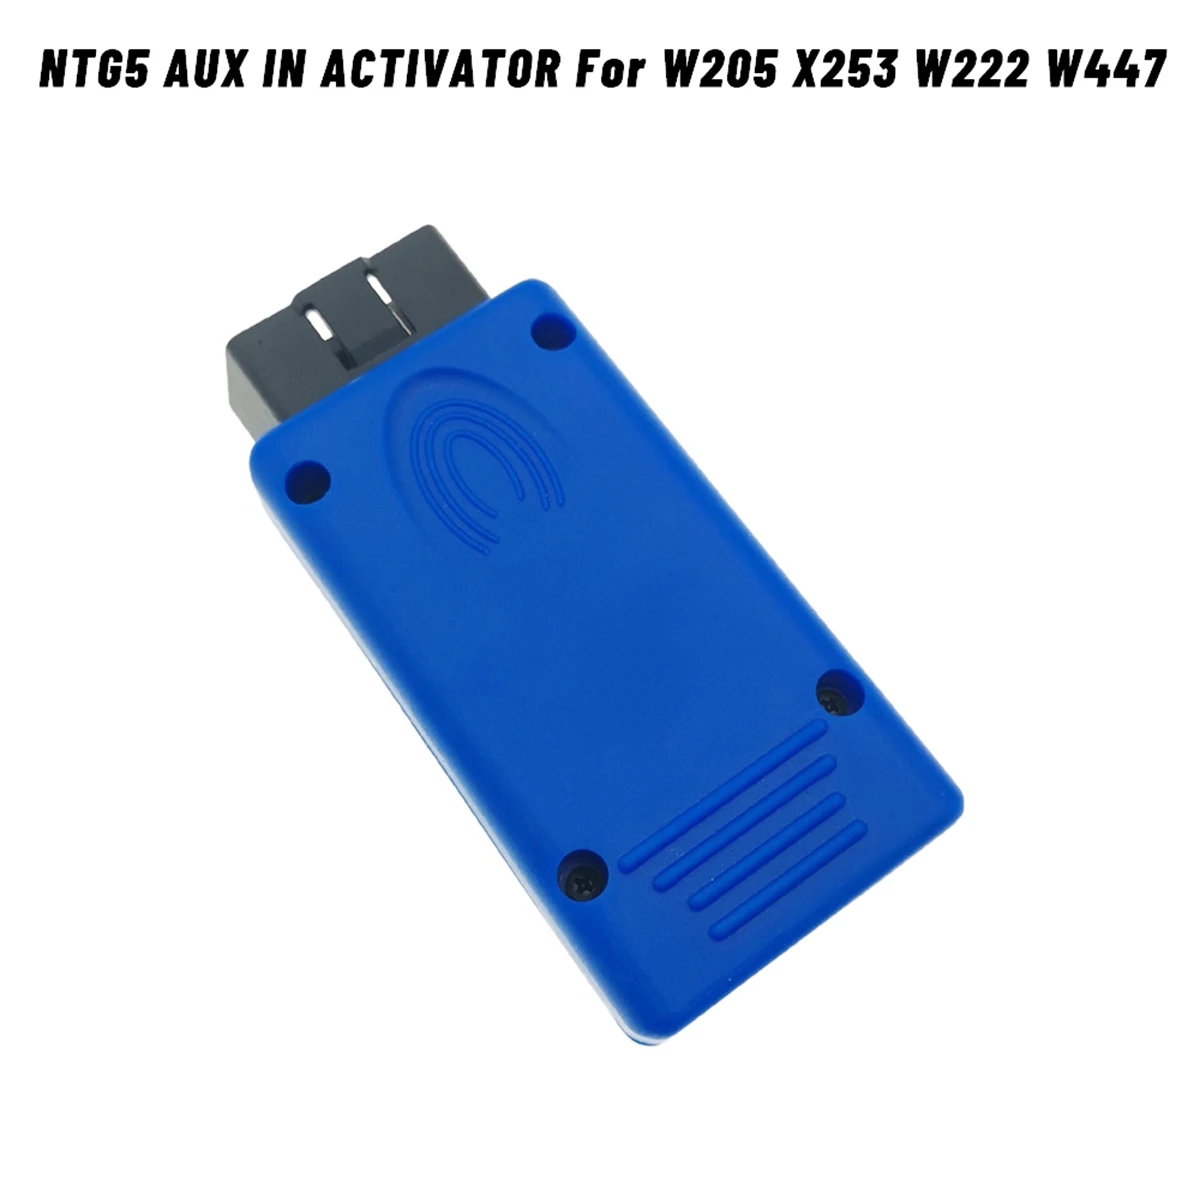 

NTG5 OBD AUX in & VIM ACTIVATOR for Mercedes Benz C/GLC/S/V CLASS W205 X253 W222 W447